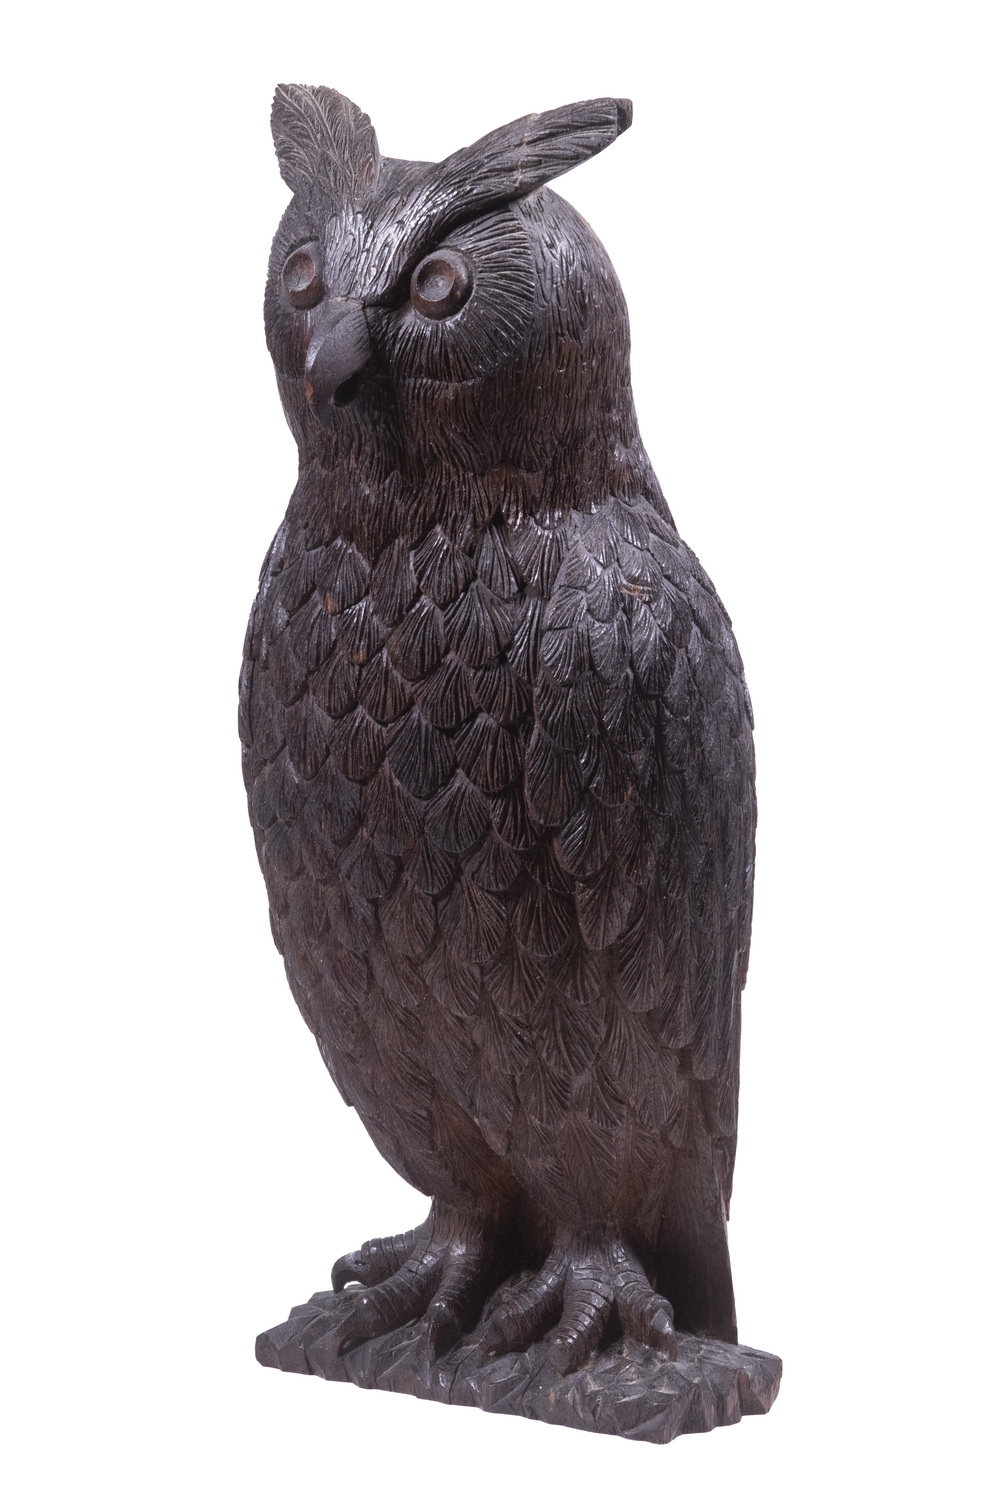 CARVED WOODEN OWL Vintage Full Size 302b3a